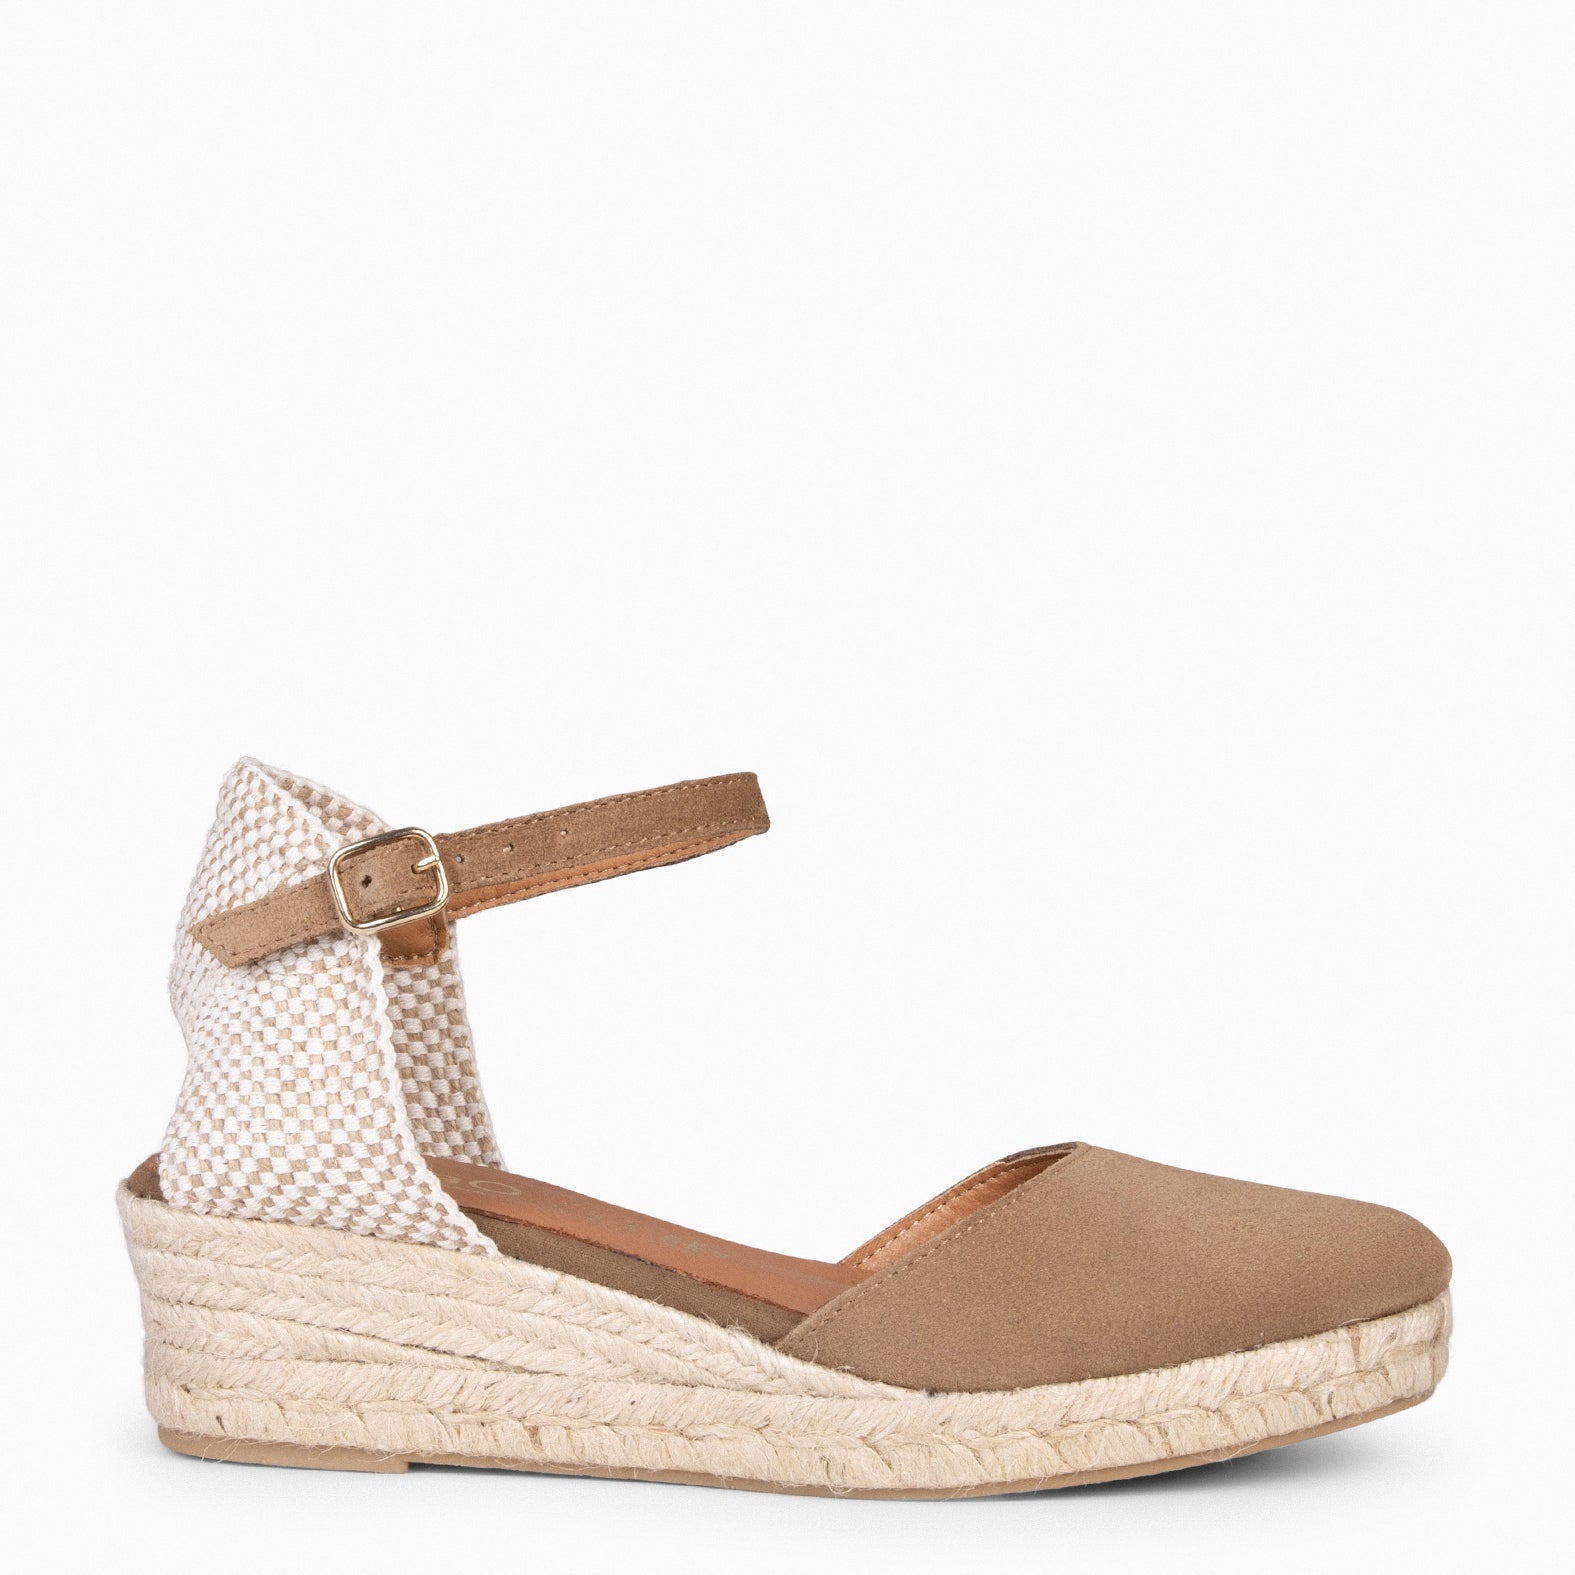 FORNELLS – TAUPE WEDGE ESPADRILLES